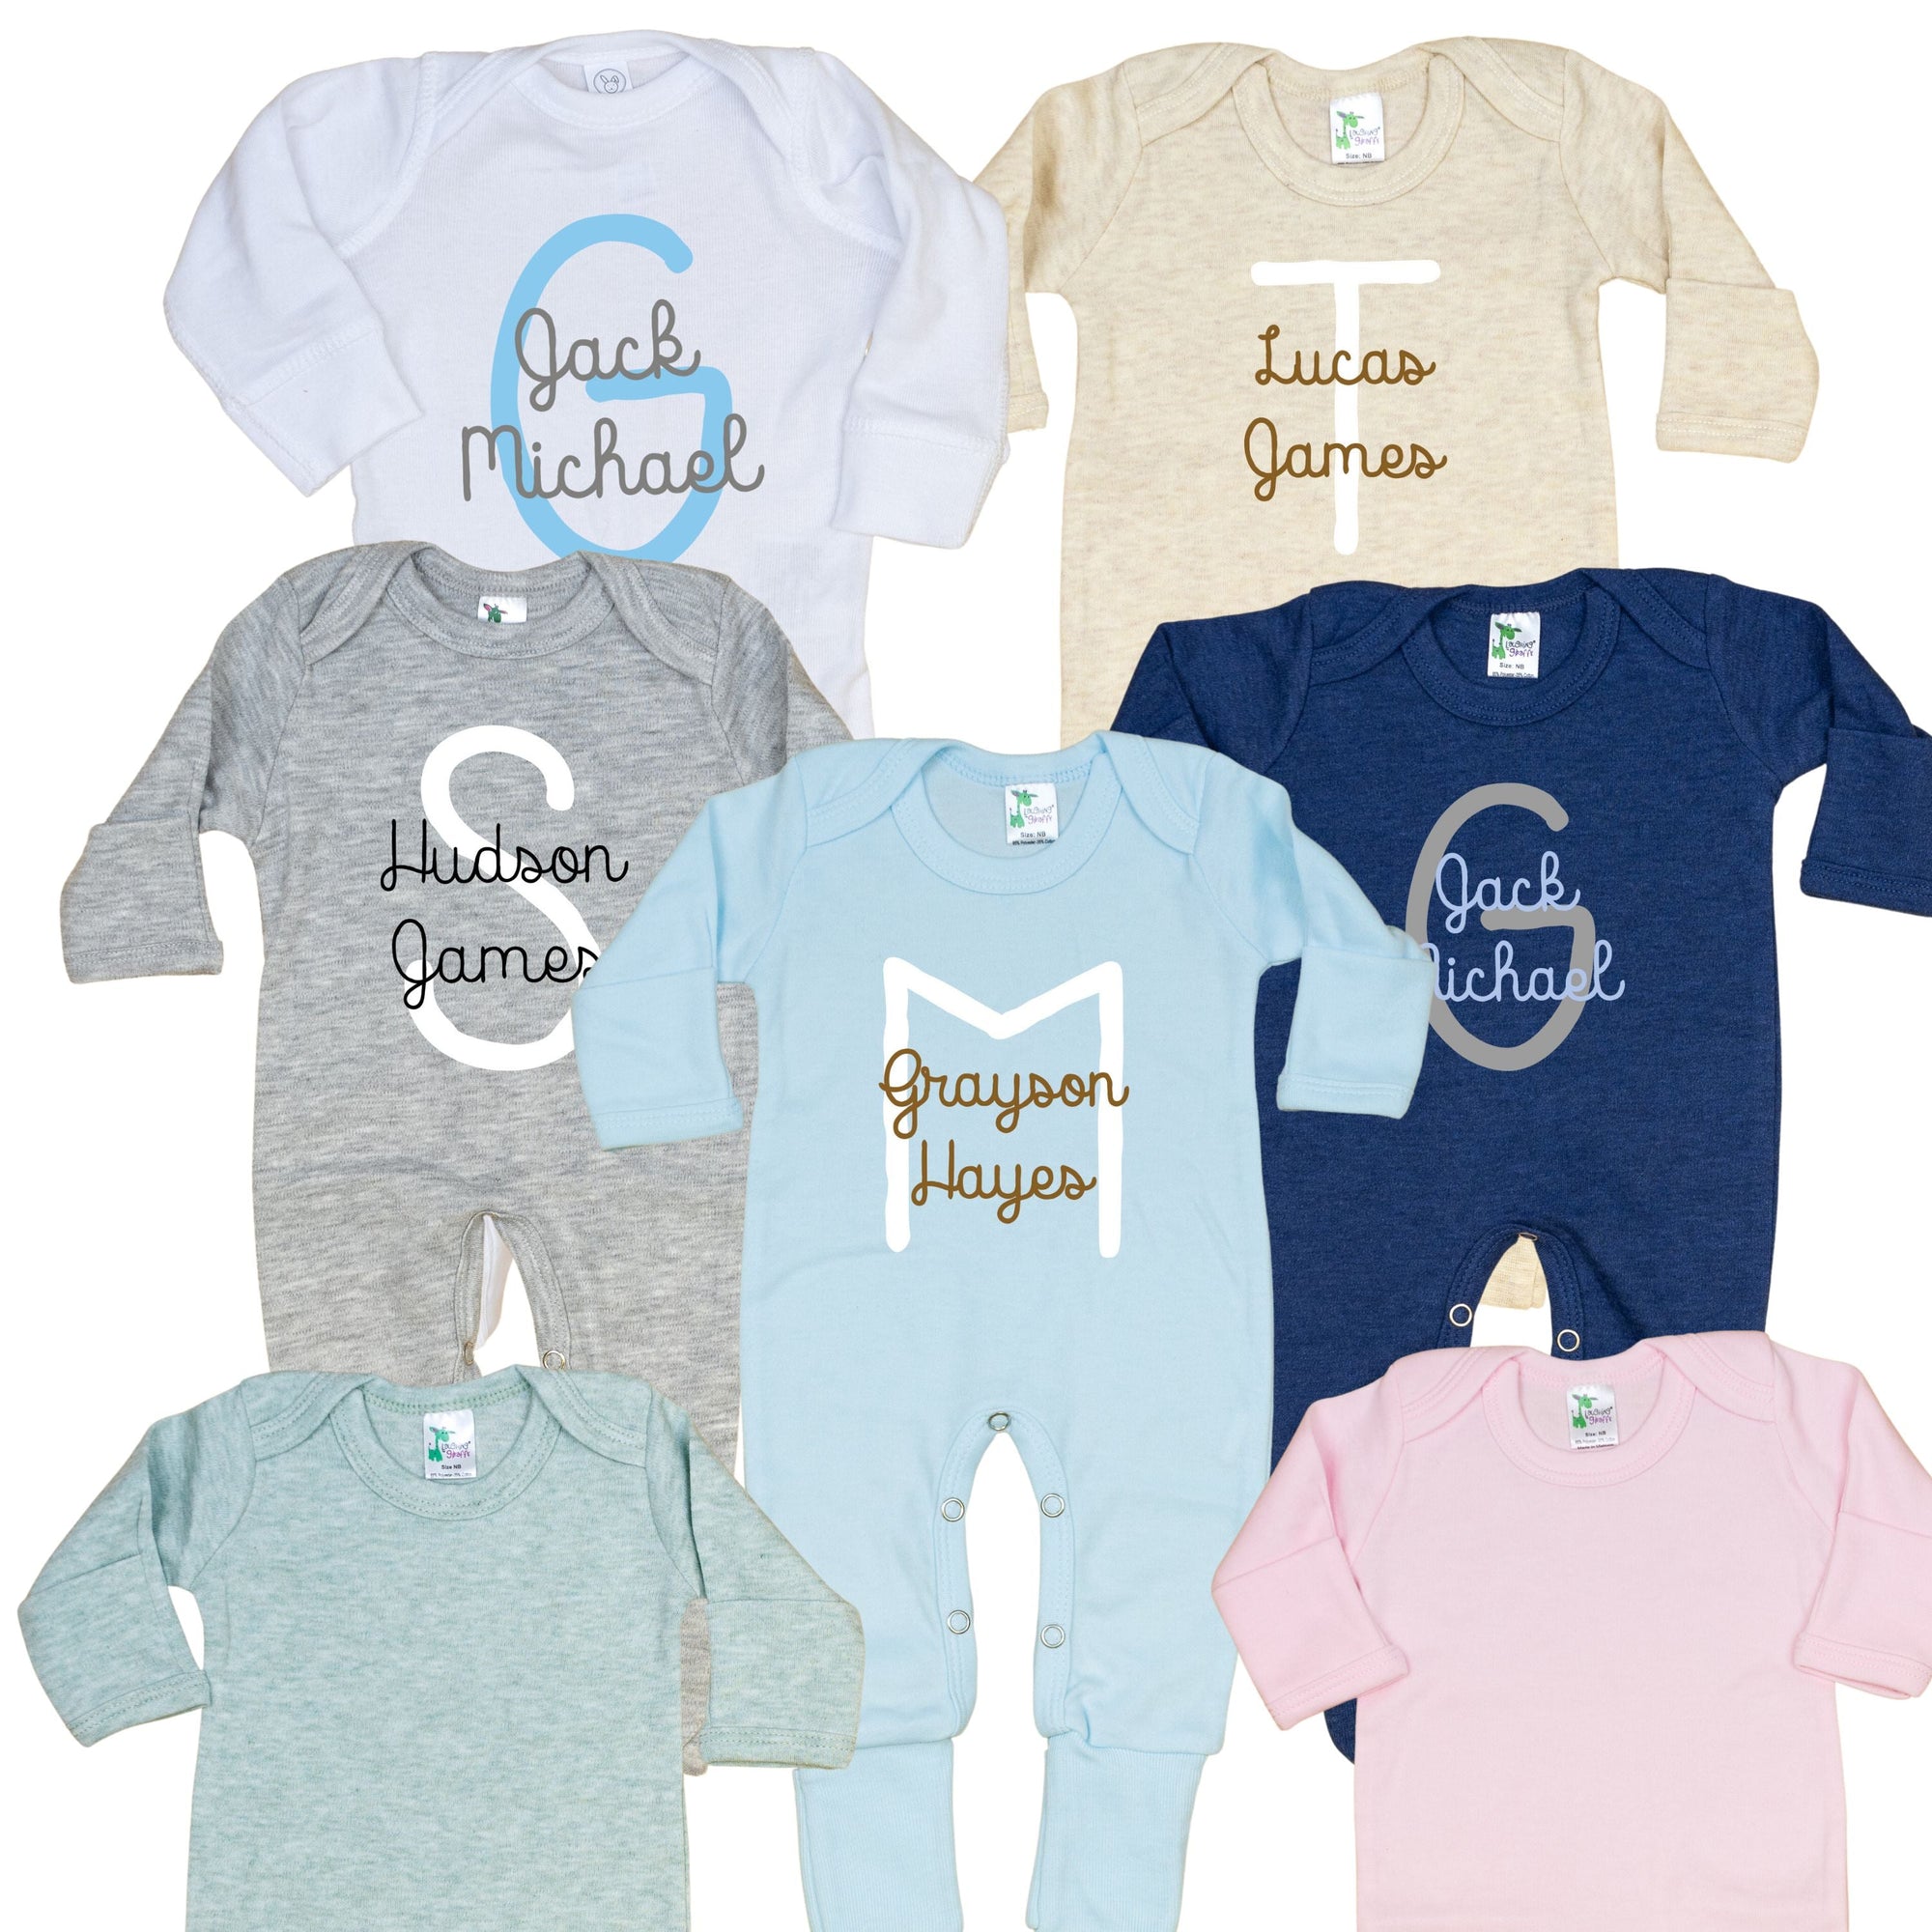 Cuddle Sleep Dream Baby One-Pieces Personalized Newborn Romper with Big Initial.